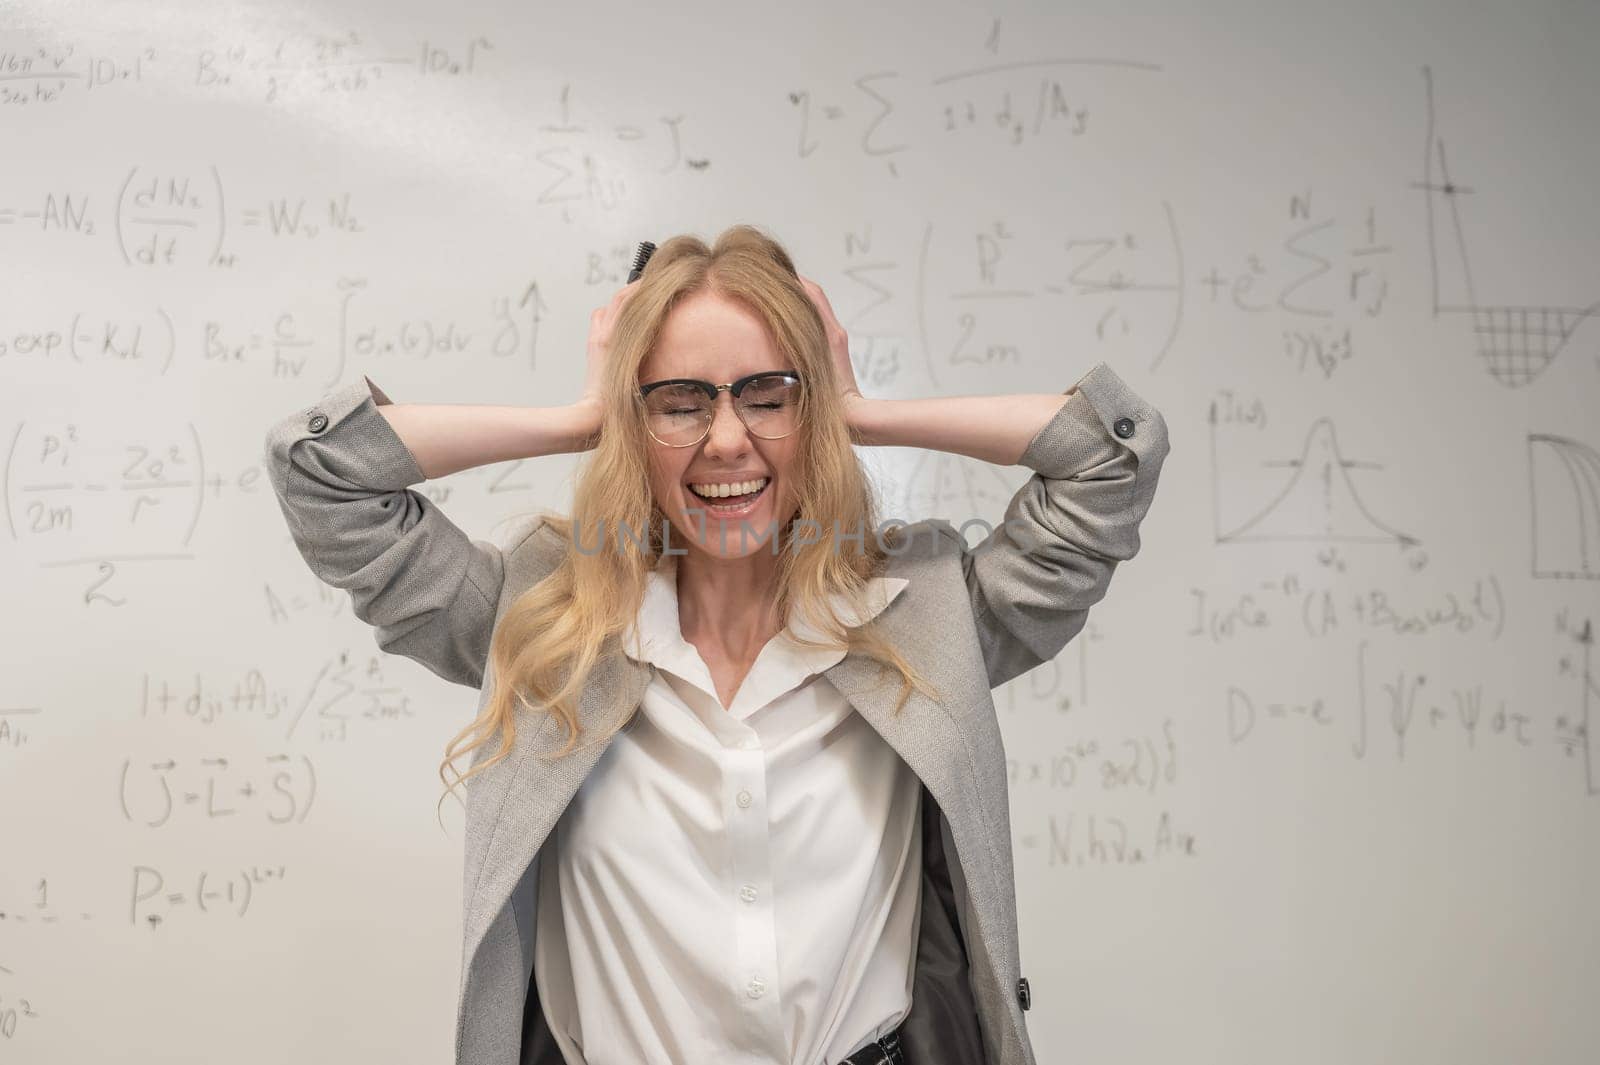 Caucasian woman stands by a white board and holds her head